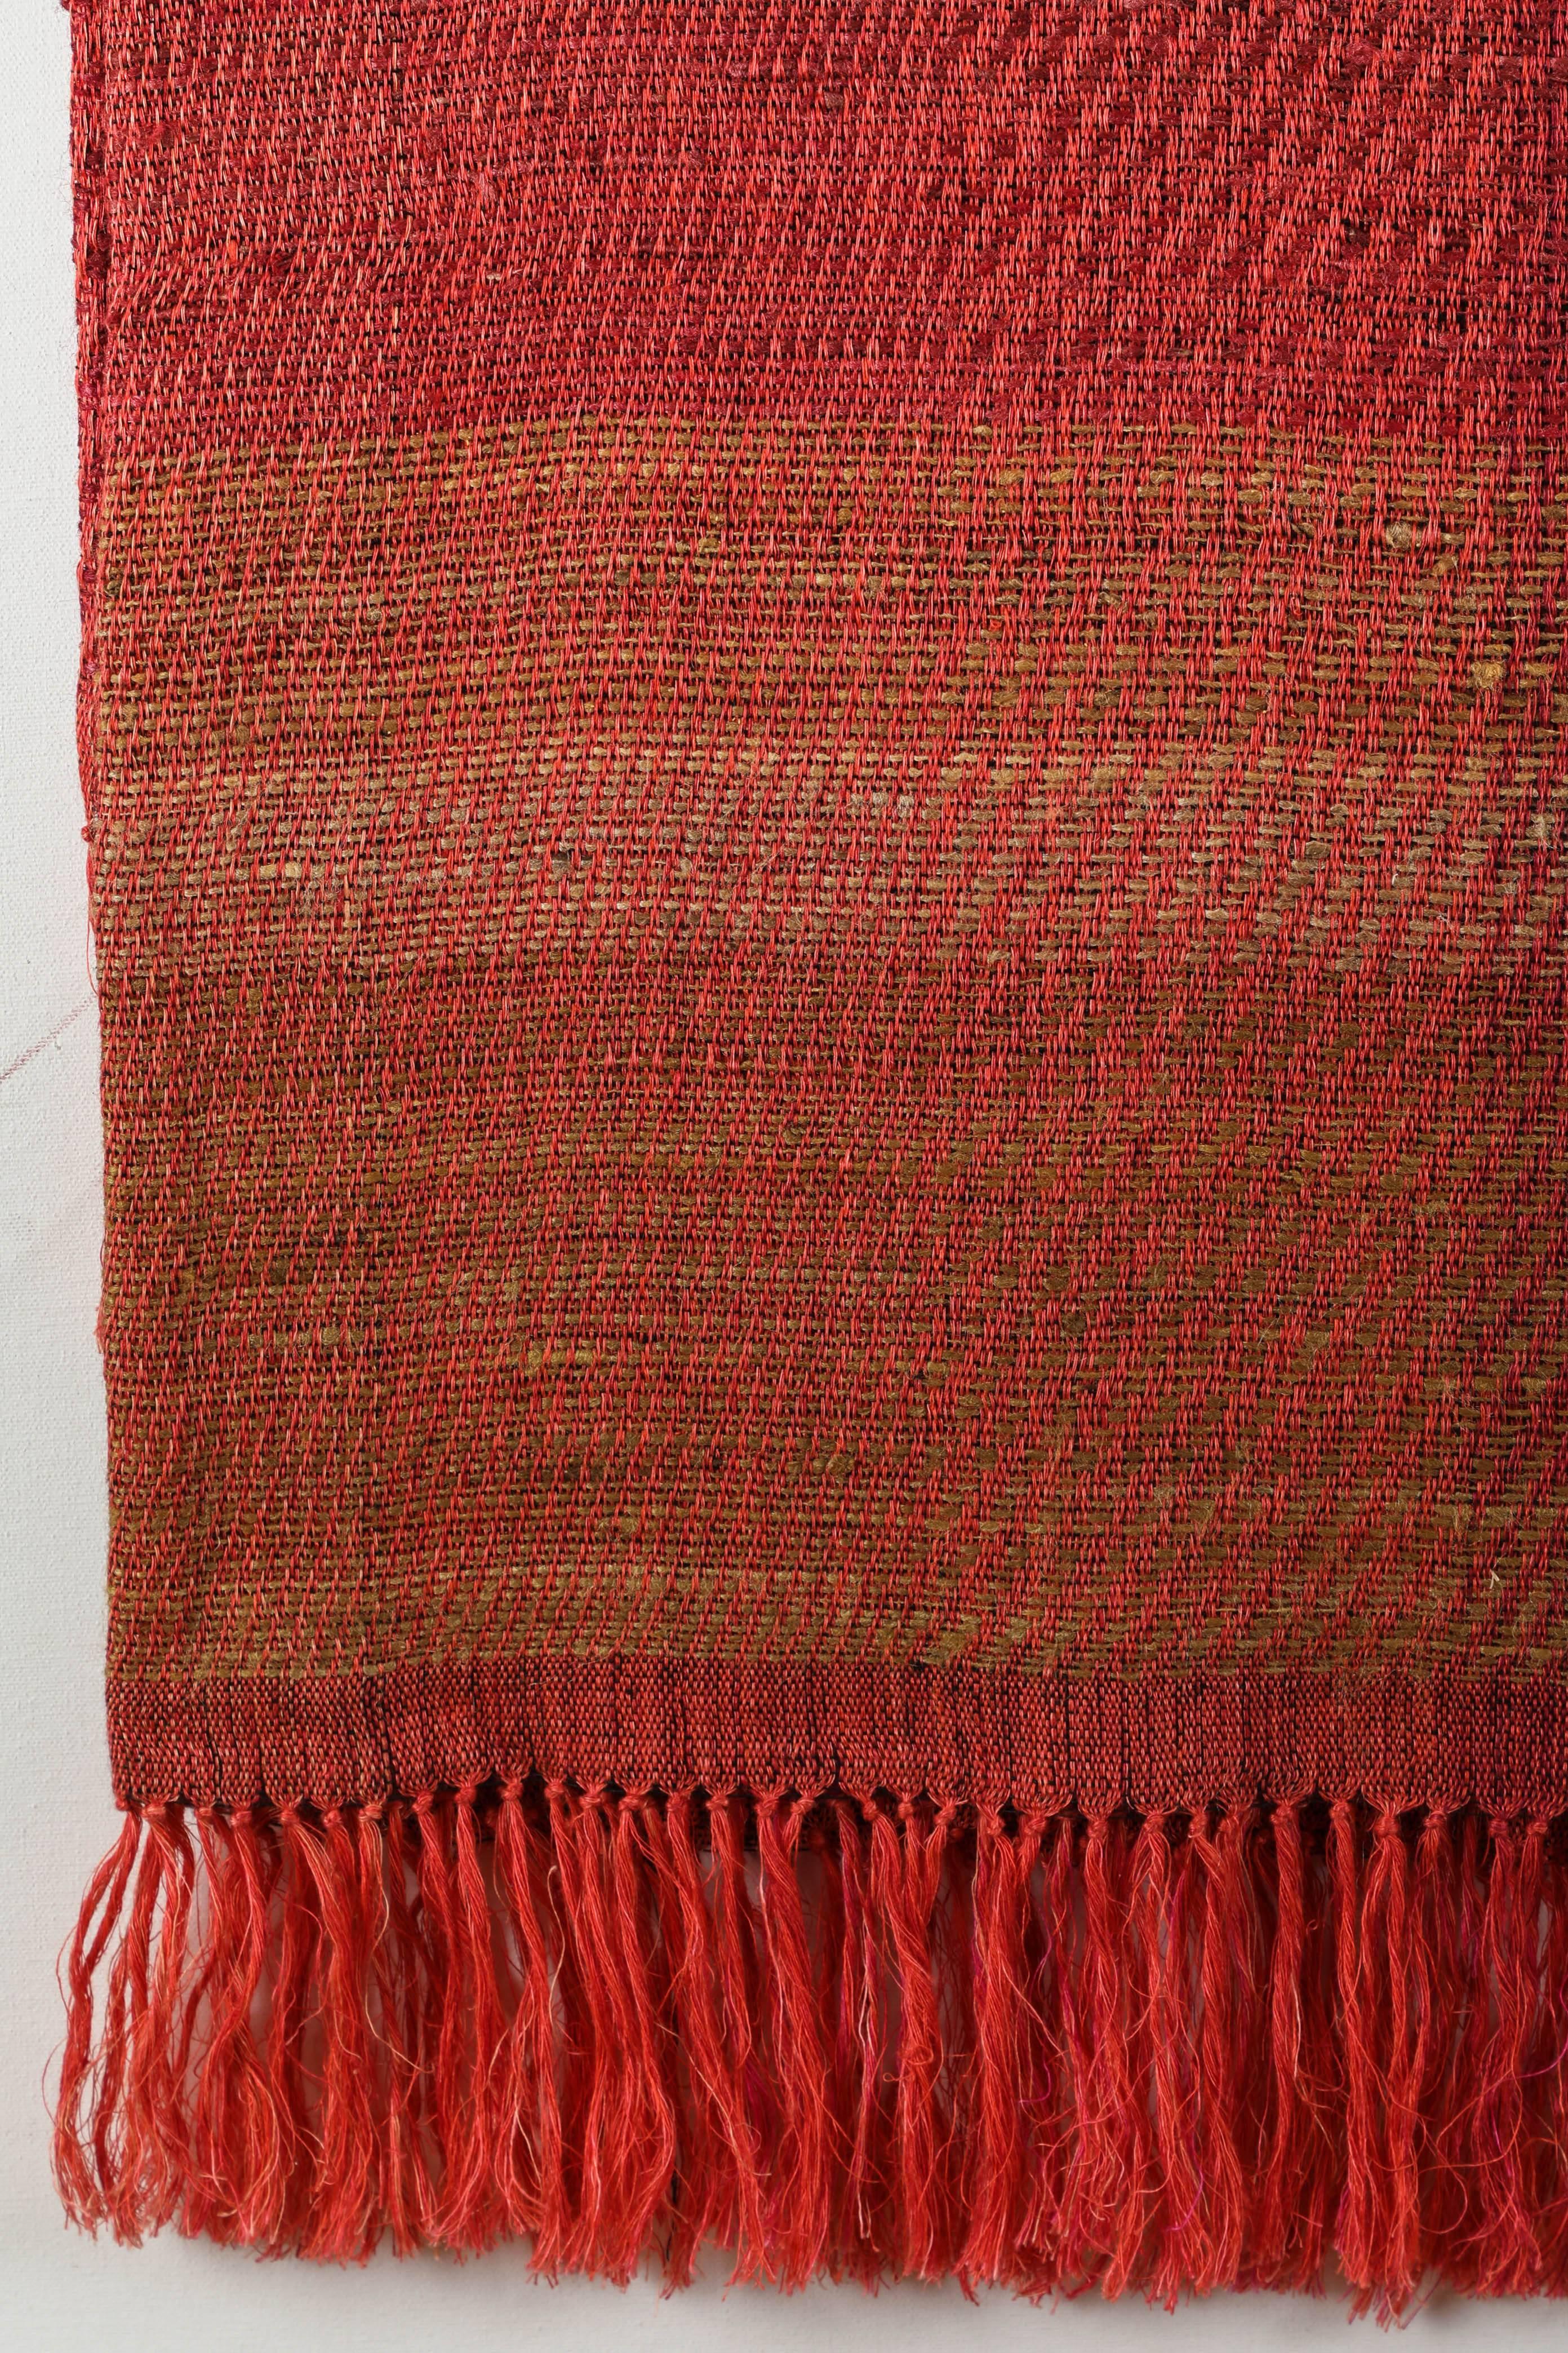 Contemporary Indian Handwoven Bedcover For Sale